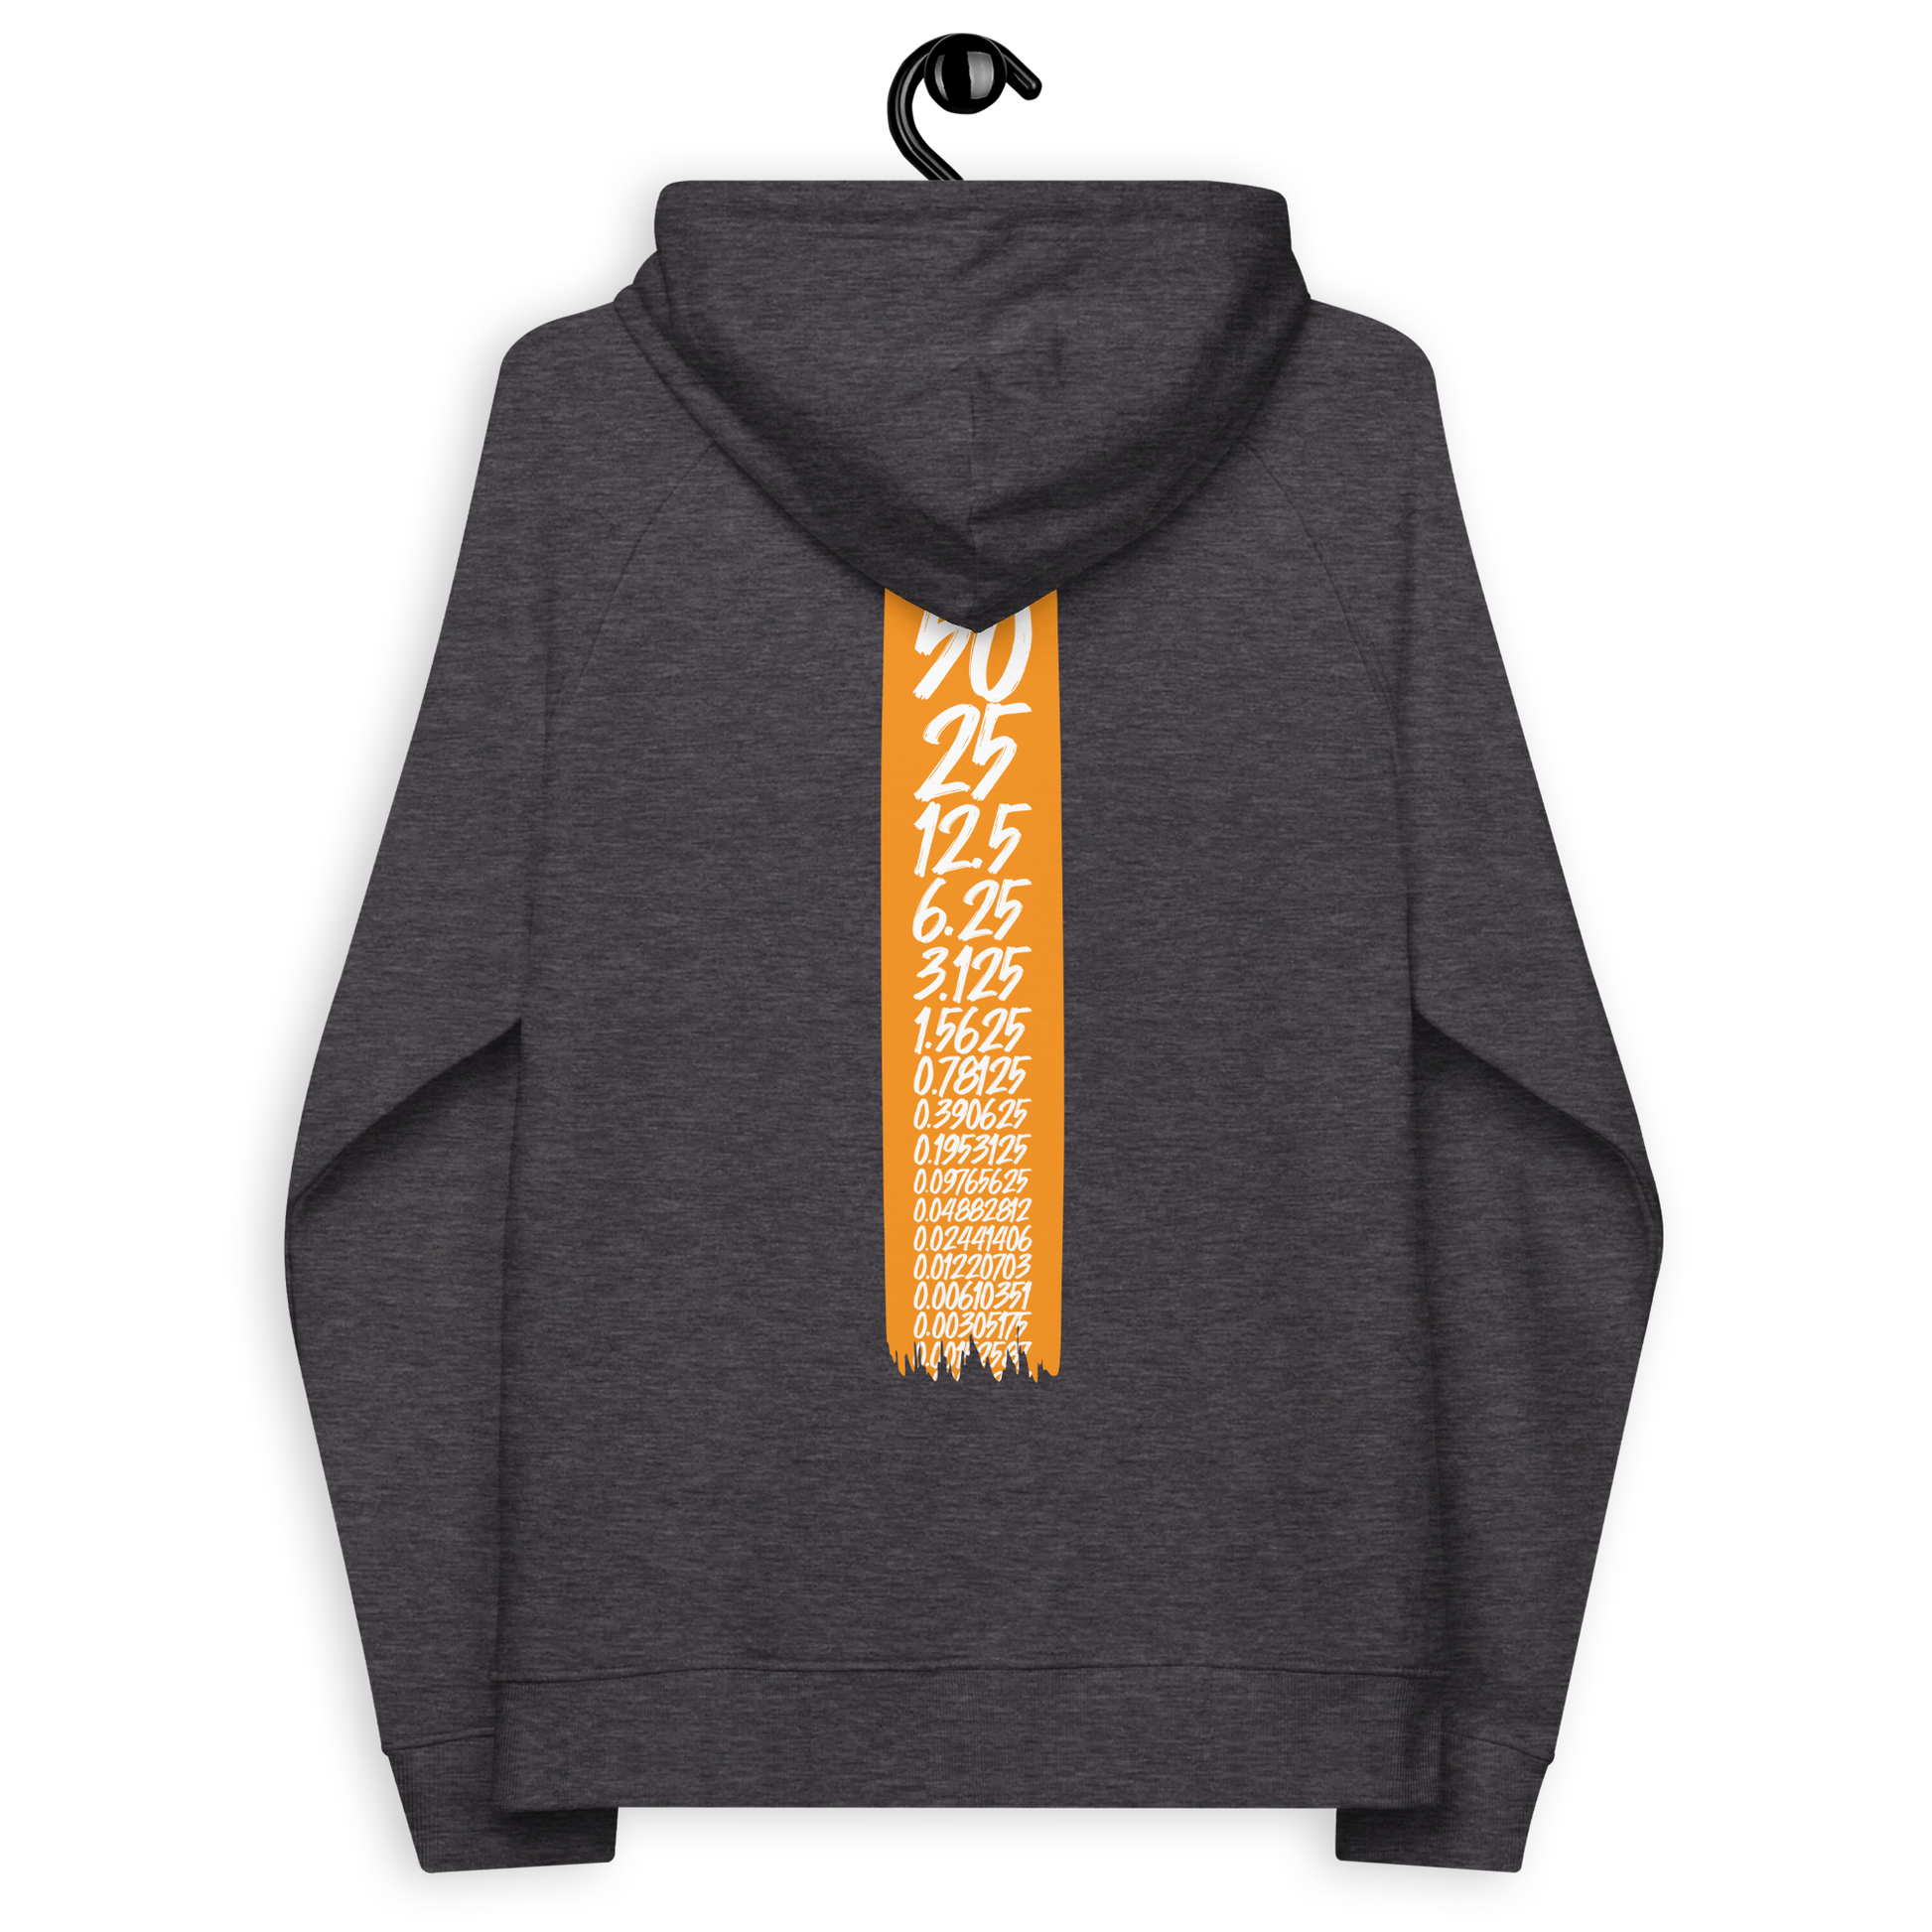 Back view of a charcoal melange colored bitcoin hoodie.